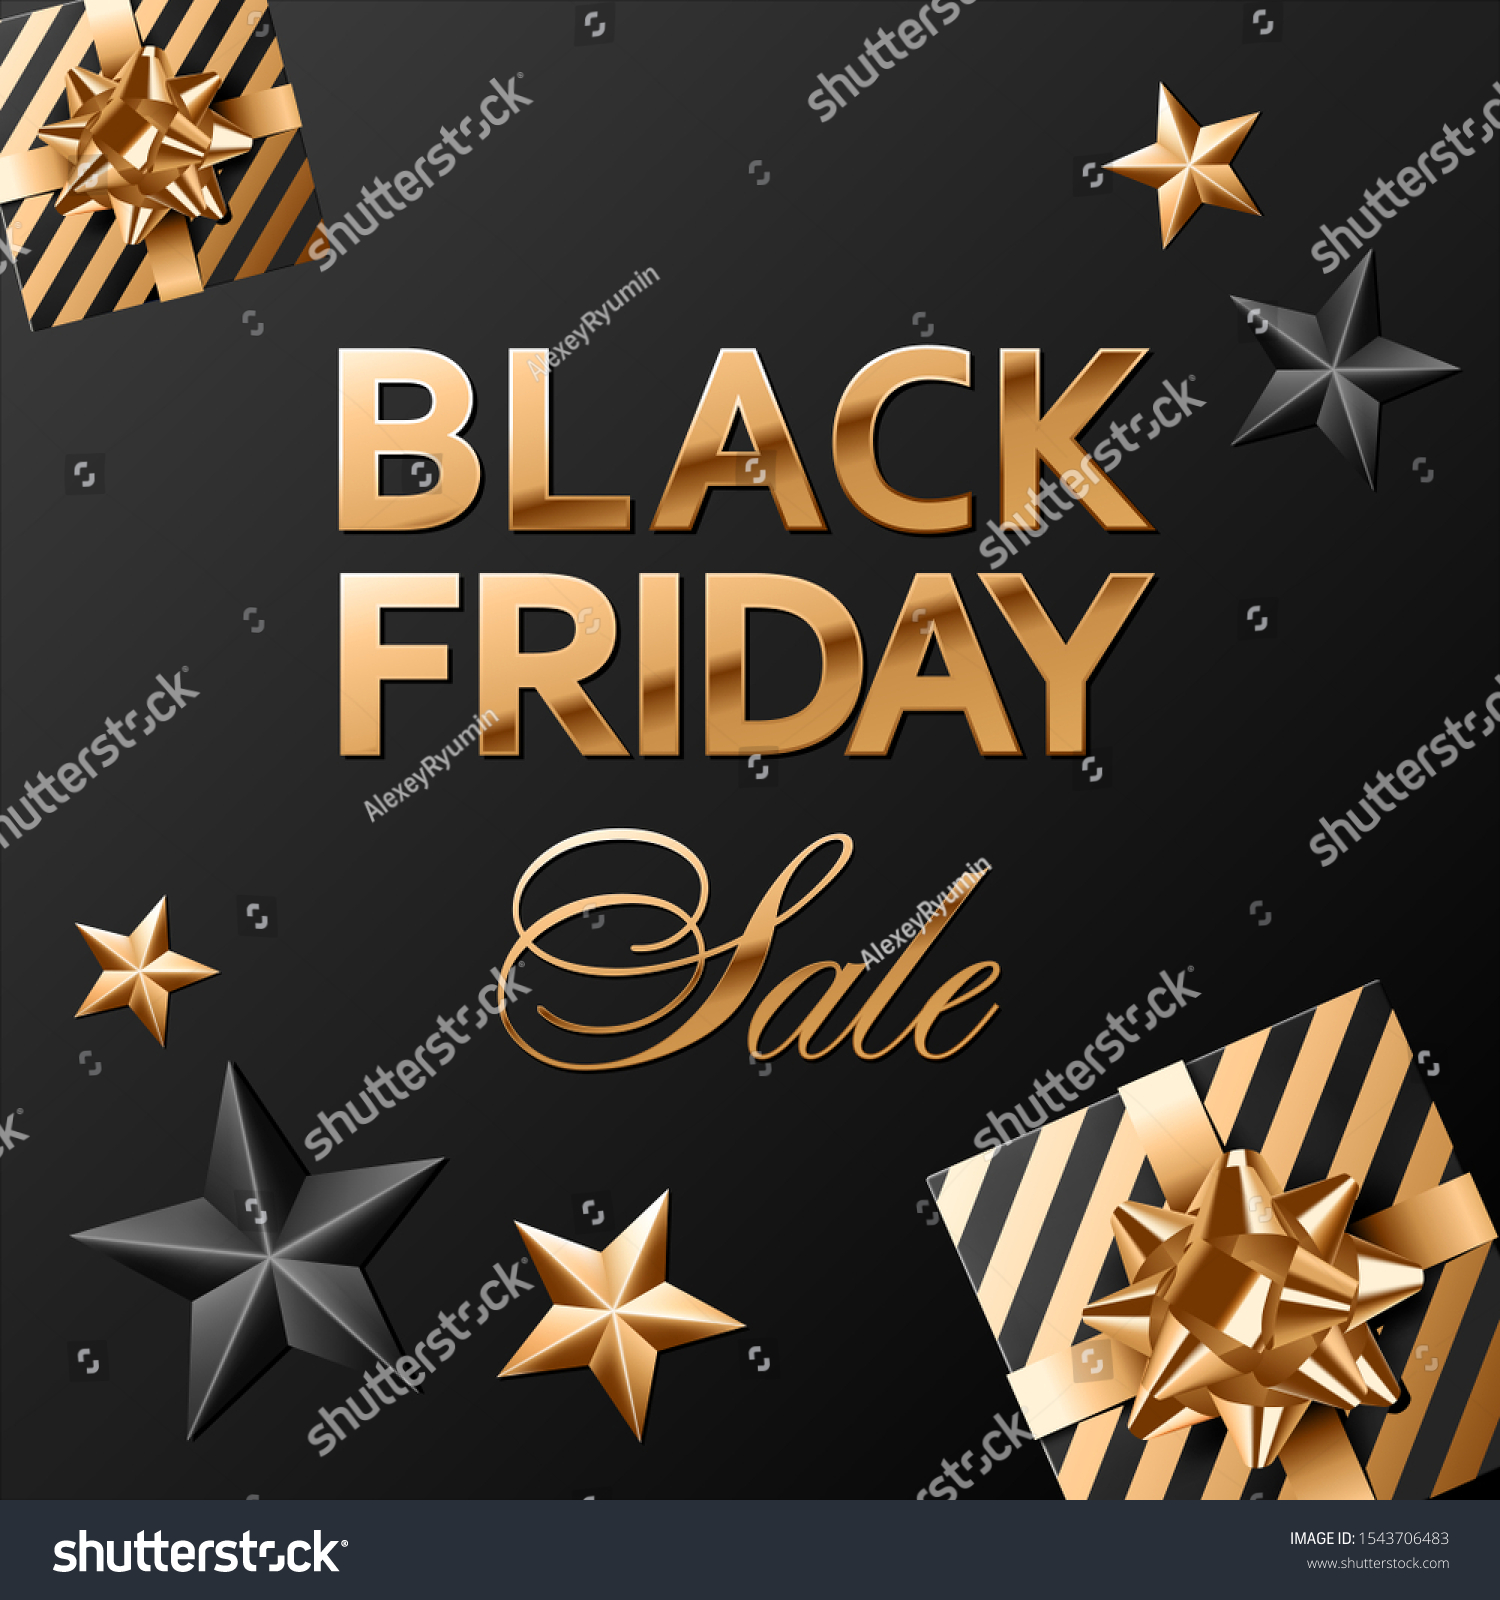 Vector gifts covered with black and gold striped paper with golden bows on black background. Black friday sale golden lettering and black and gold stars. Square banner or social network post template.
